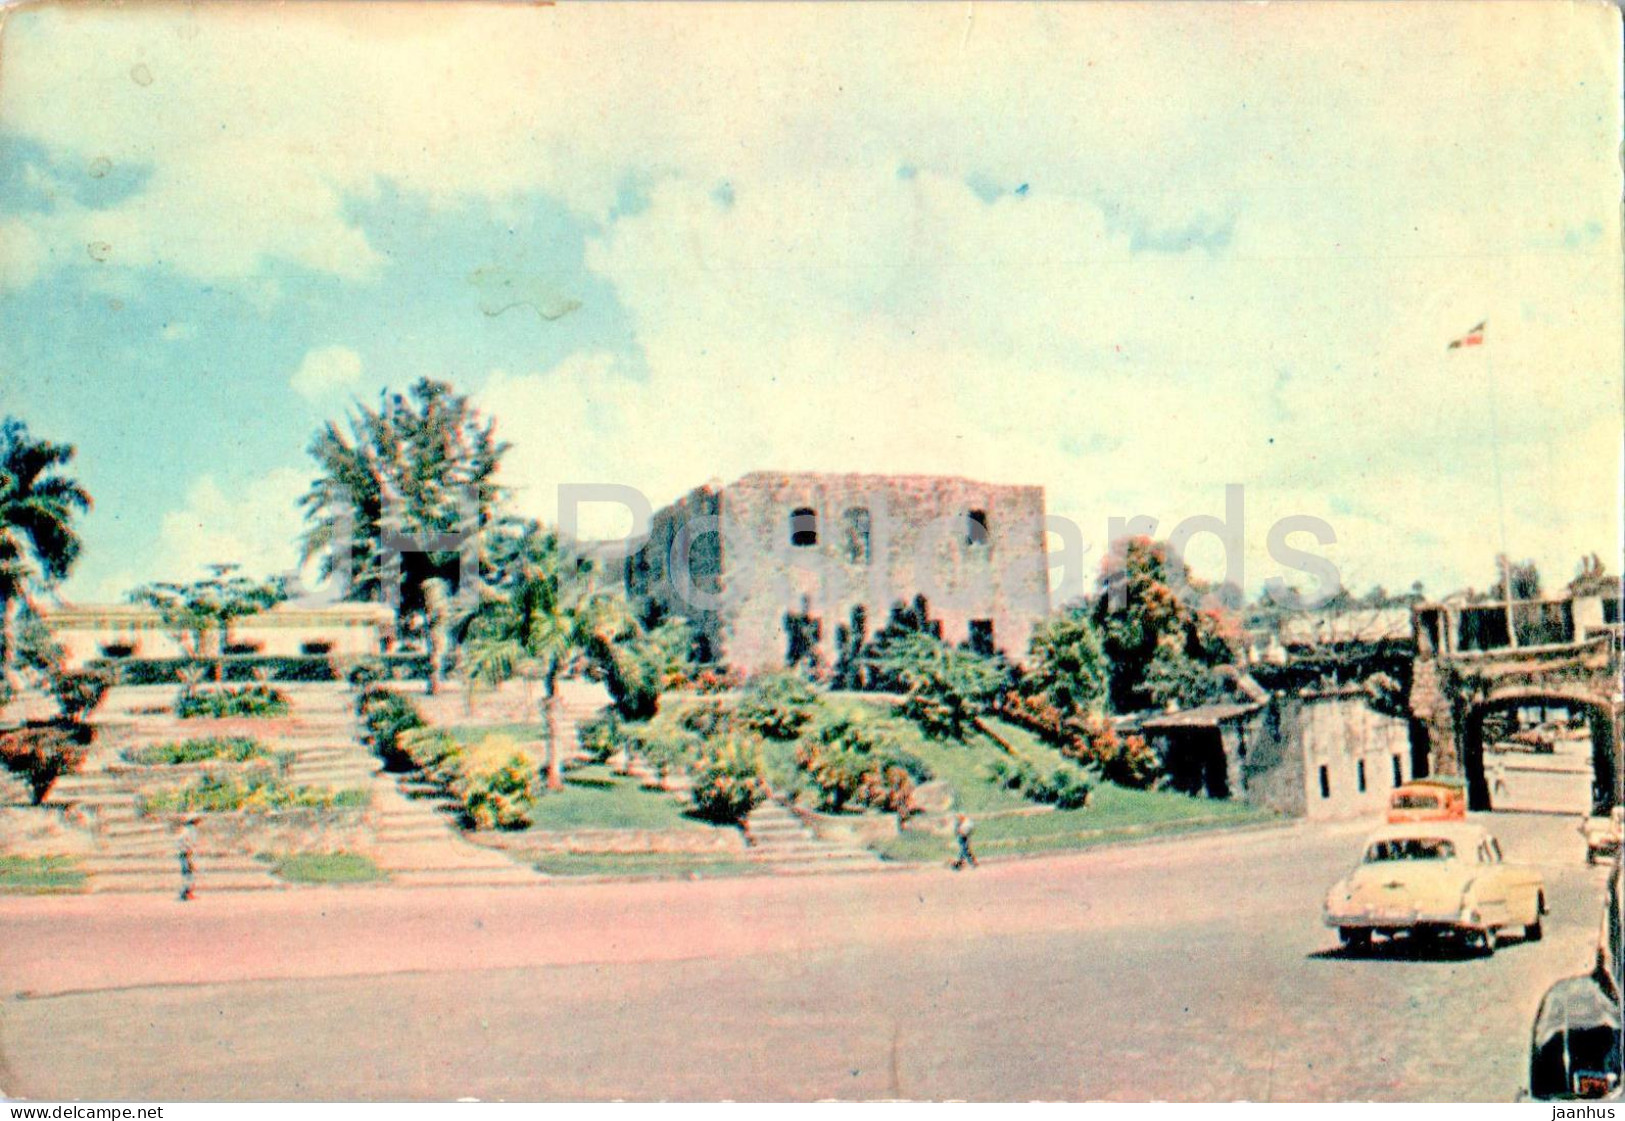 Christophe Colomb Aux Indes Occidentales - Plasmarine - Old Postcard - 1955 - Dominican Republic - Used - Dominicaanse Republiek